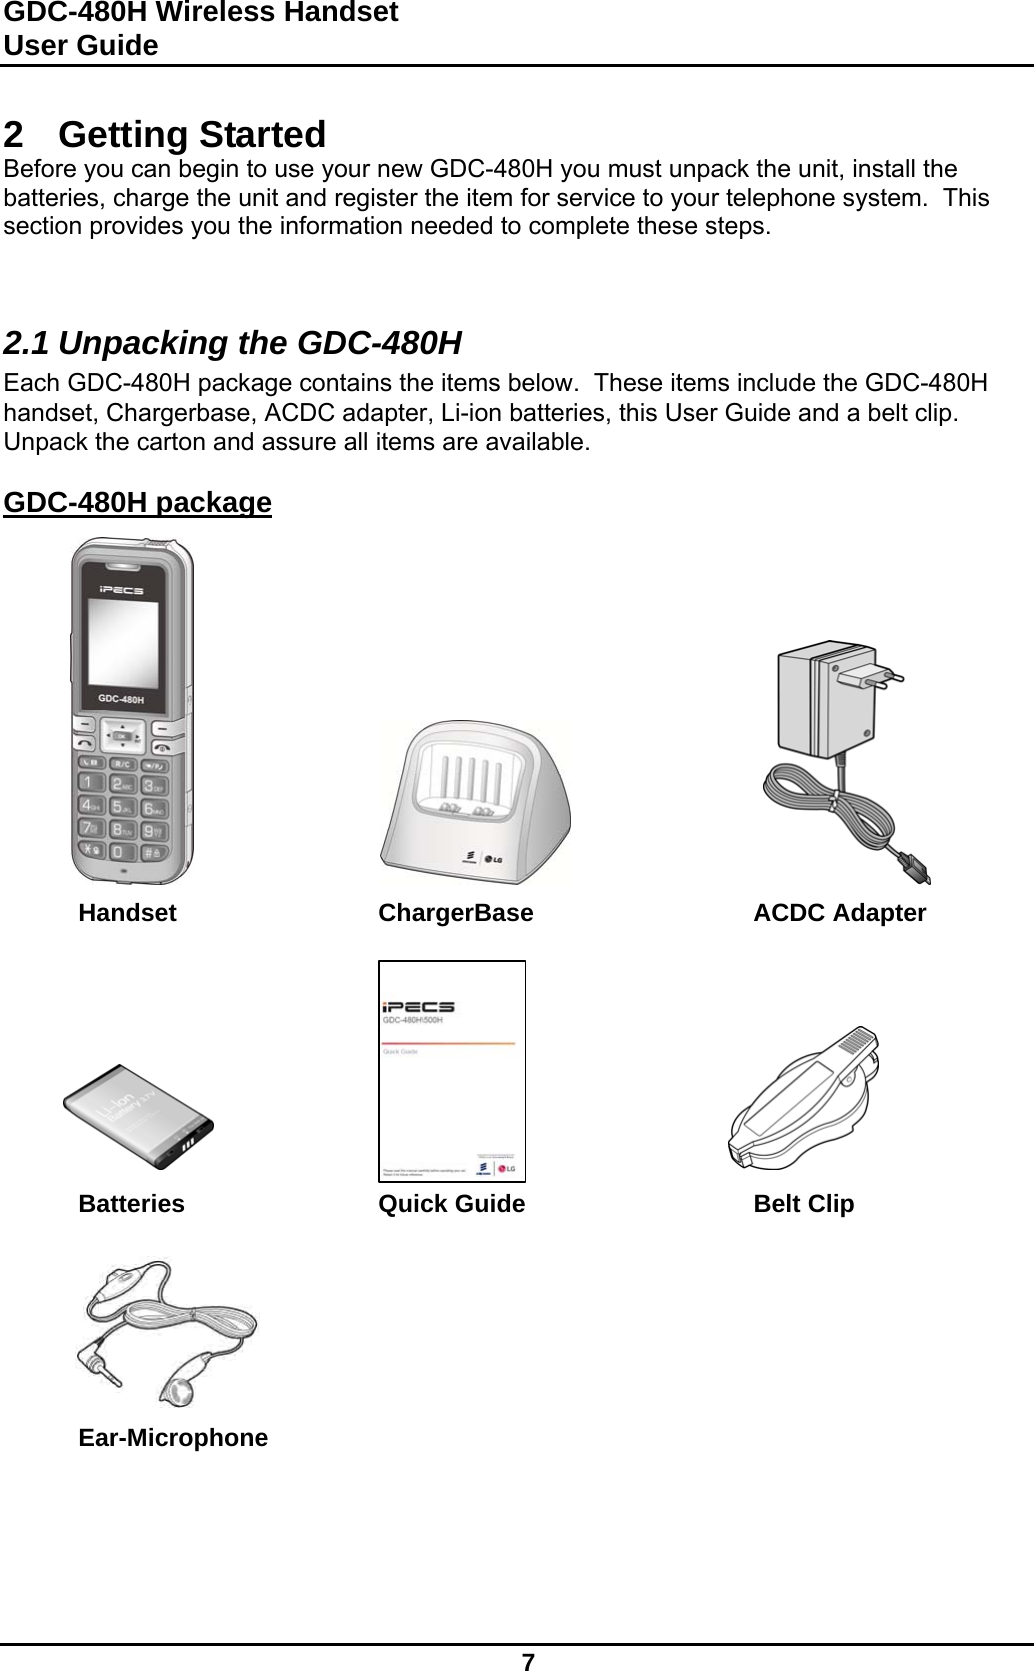 GDC-480H Wireless Handset User Guide   7  2 Getting Started Before you can begin to use your new GDC-480H you must unpack the unit, install the batteries, charge the unit and register the item for service to your telephone system.  This section provides you the information needed to complete these steps.   2.1 Unpacking the GDC-480H Each GDC-480H package contains the items below.  These items include the GDC-480H handset, Chargerbase, ACDC adapter, Li-ion batteries, this User Guide and a belt clip.  Unpack the carton and assure all items are available.  GDC-480H package               Handset   ChargerBase   ACDC Adapter               Batteries   Quick Guide    Belt Clip        Ear-Microphone       